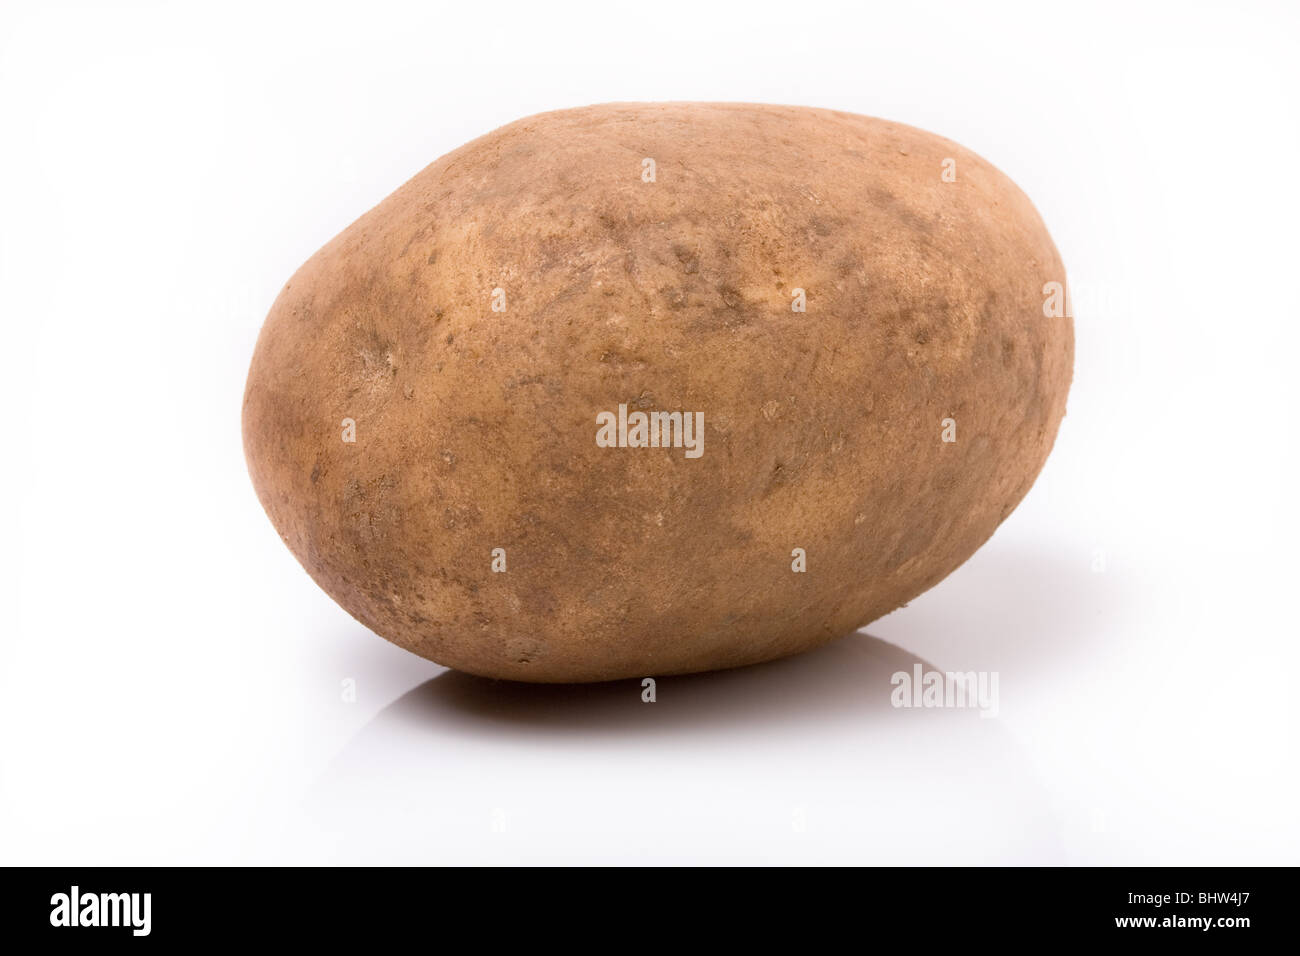 https://c8.alamy.com/comp/BHW4J7/large-unwashed-natural-potato-from-low-viewpoint-aganst-white-background-BHW4J7.jpg